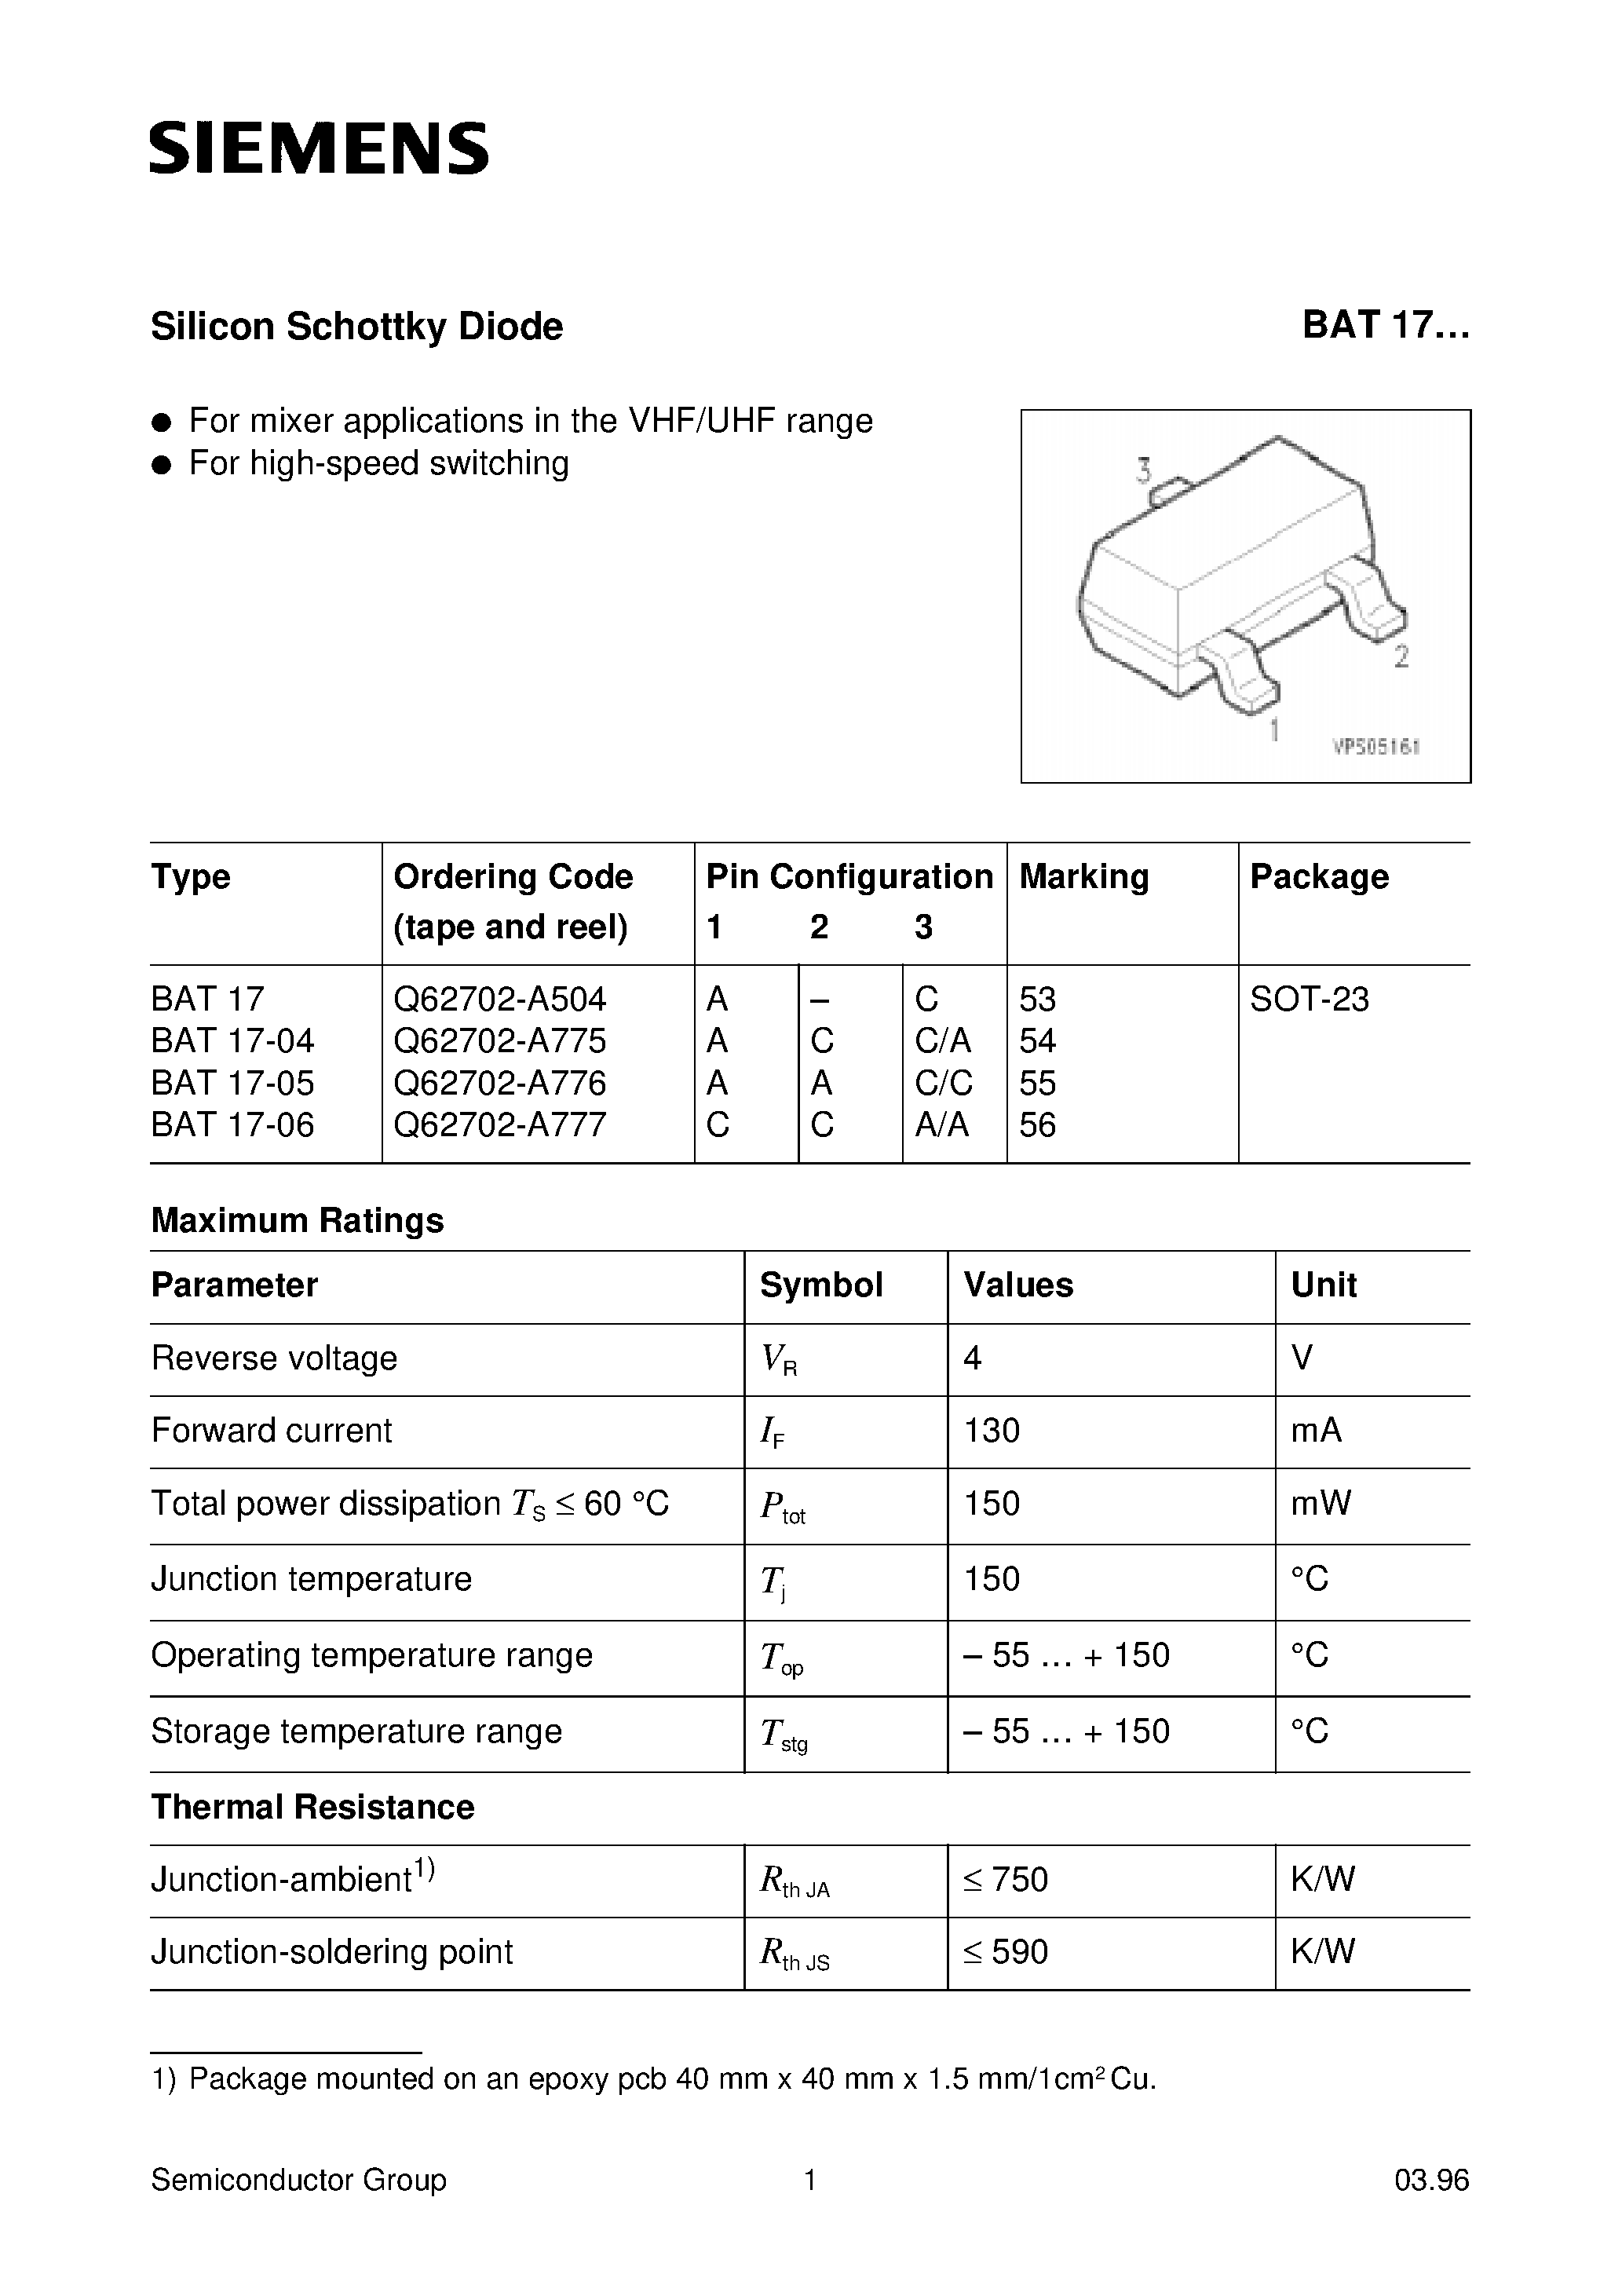 Datasheet BAT17 - Silicon Schottky Diode (For mixer applications in the VHF/UHF range For high-speed switching) page 1